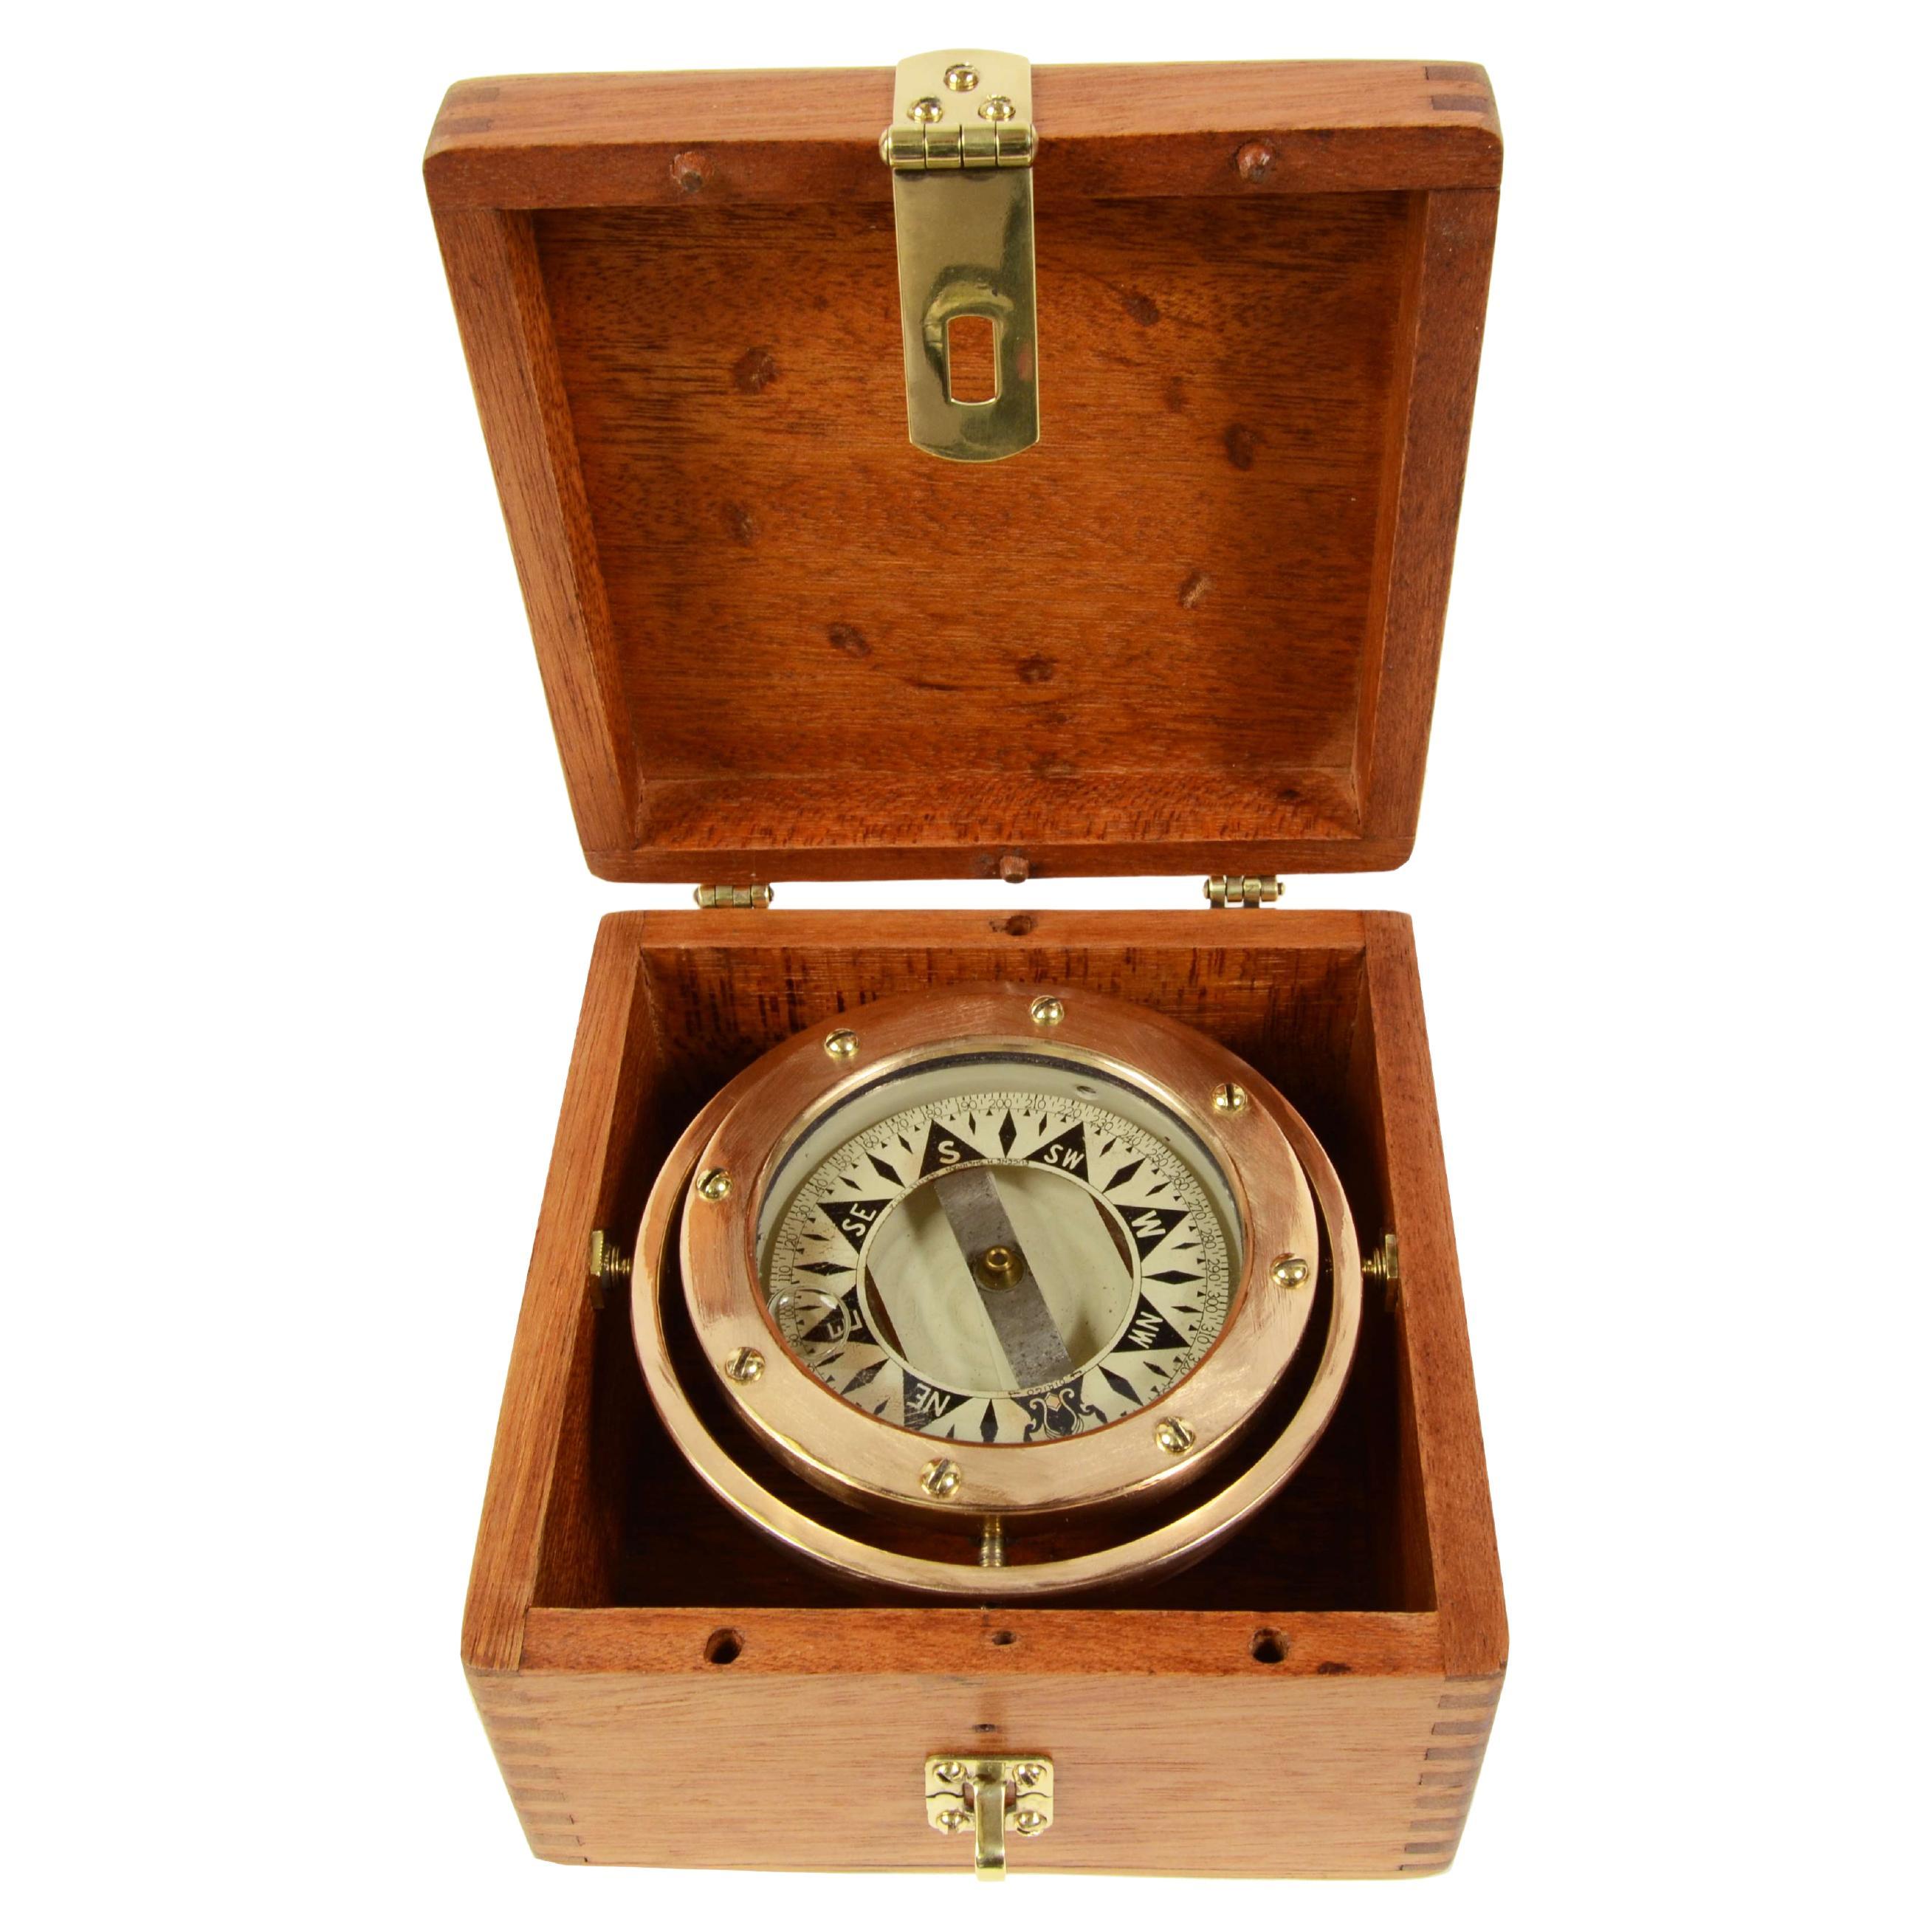 Details about   Vintage Marine Nautical Chrome Beautiful Compass Gifting Item 